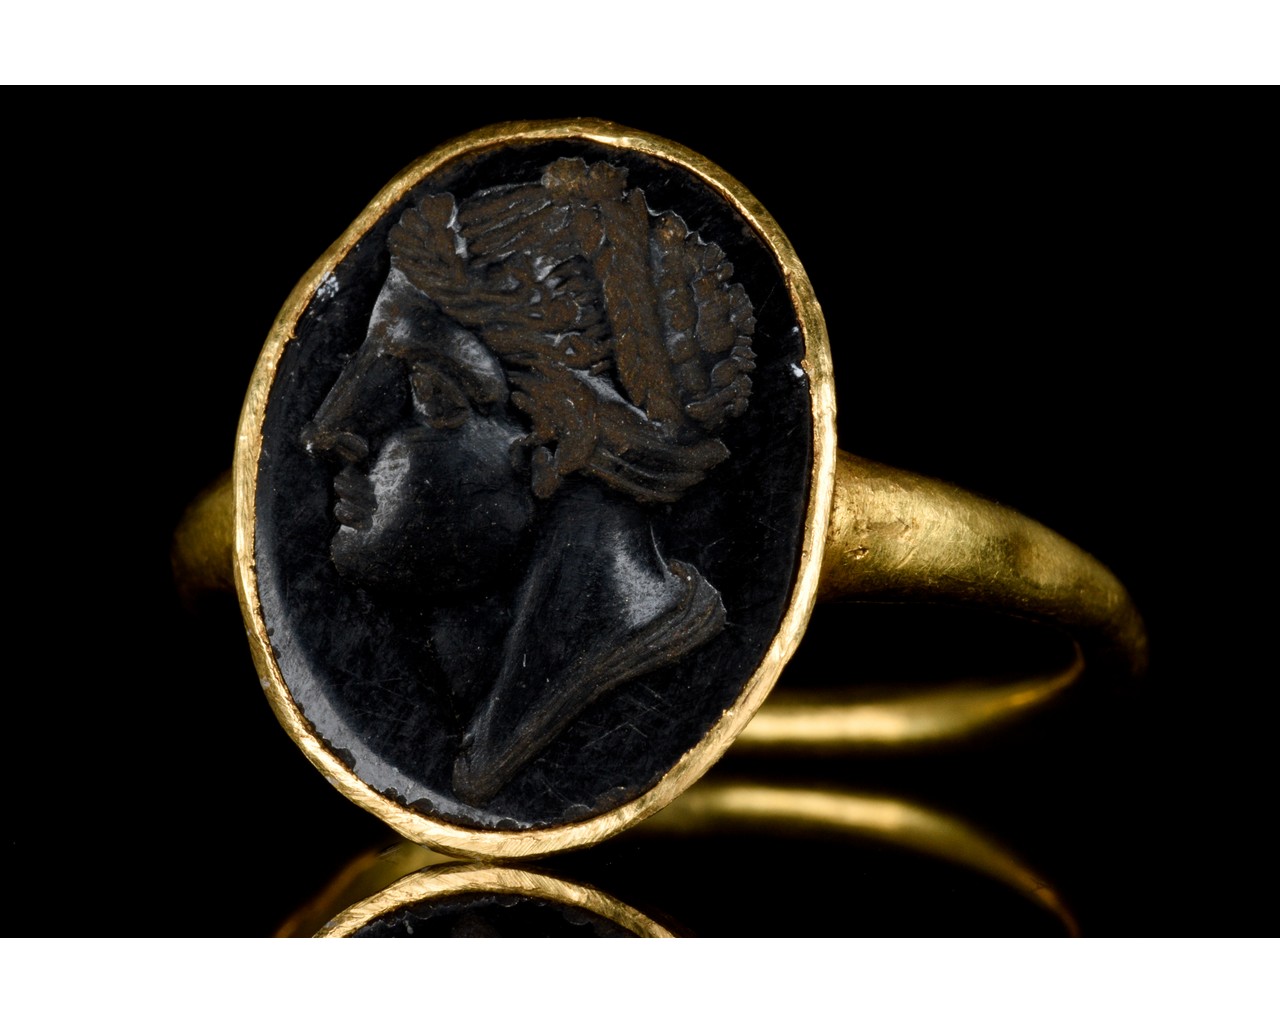 LATE HELLENISTIC GOLD INTAGLIO RING WITH PORTRAIT - FULL ANALYSIS